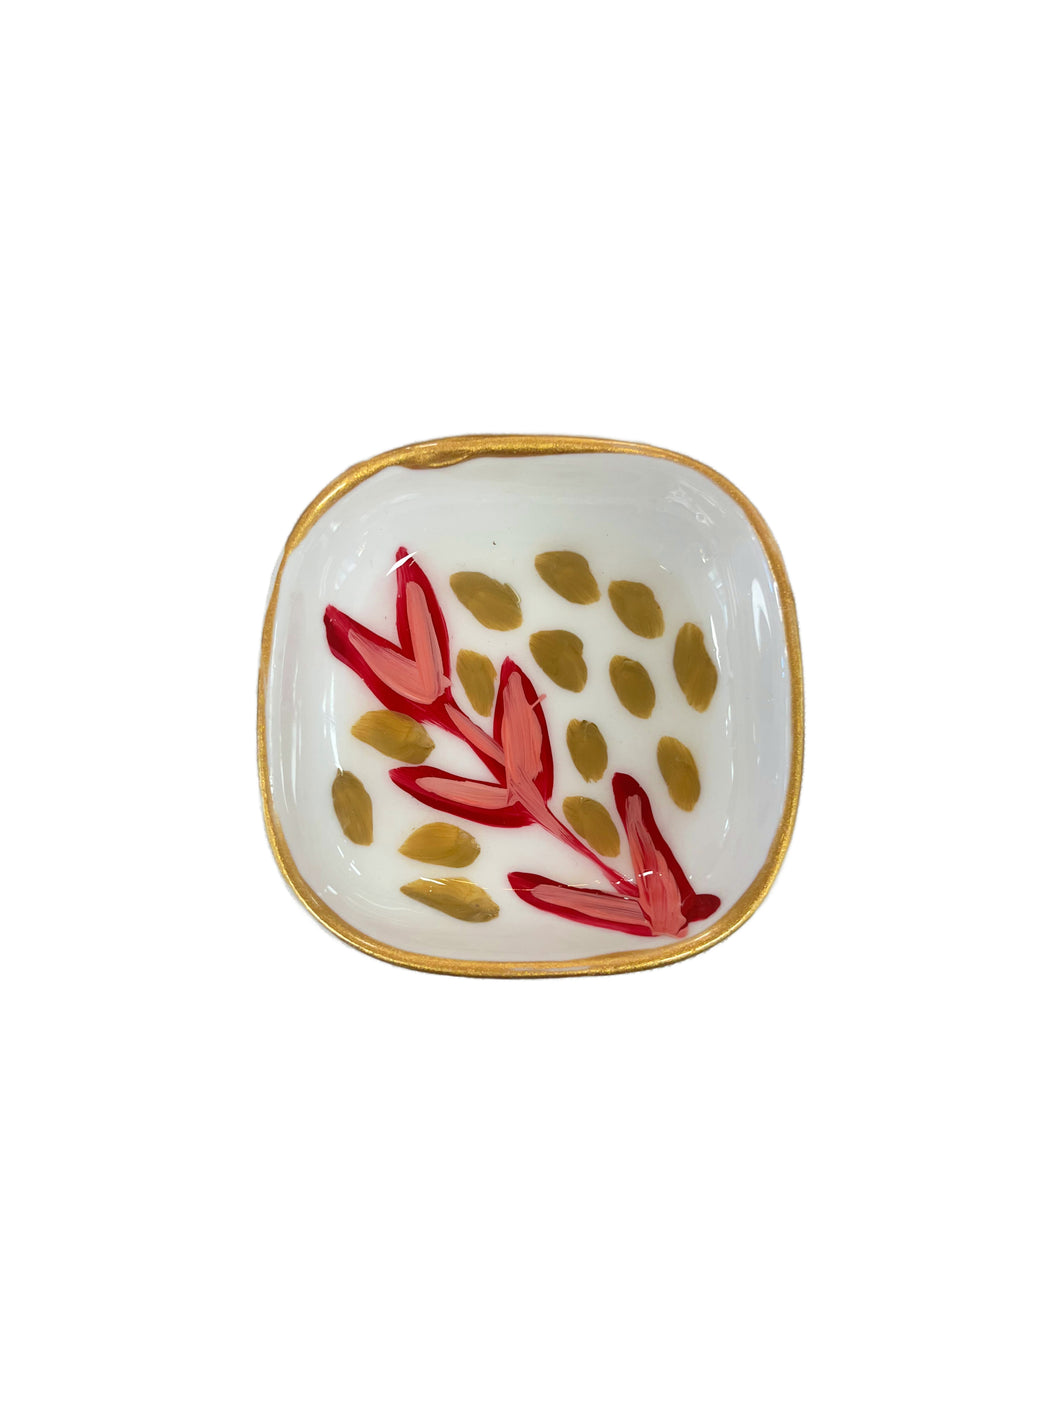 Hand-painted Porcelain Ring Dish, Amor